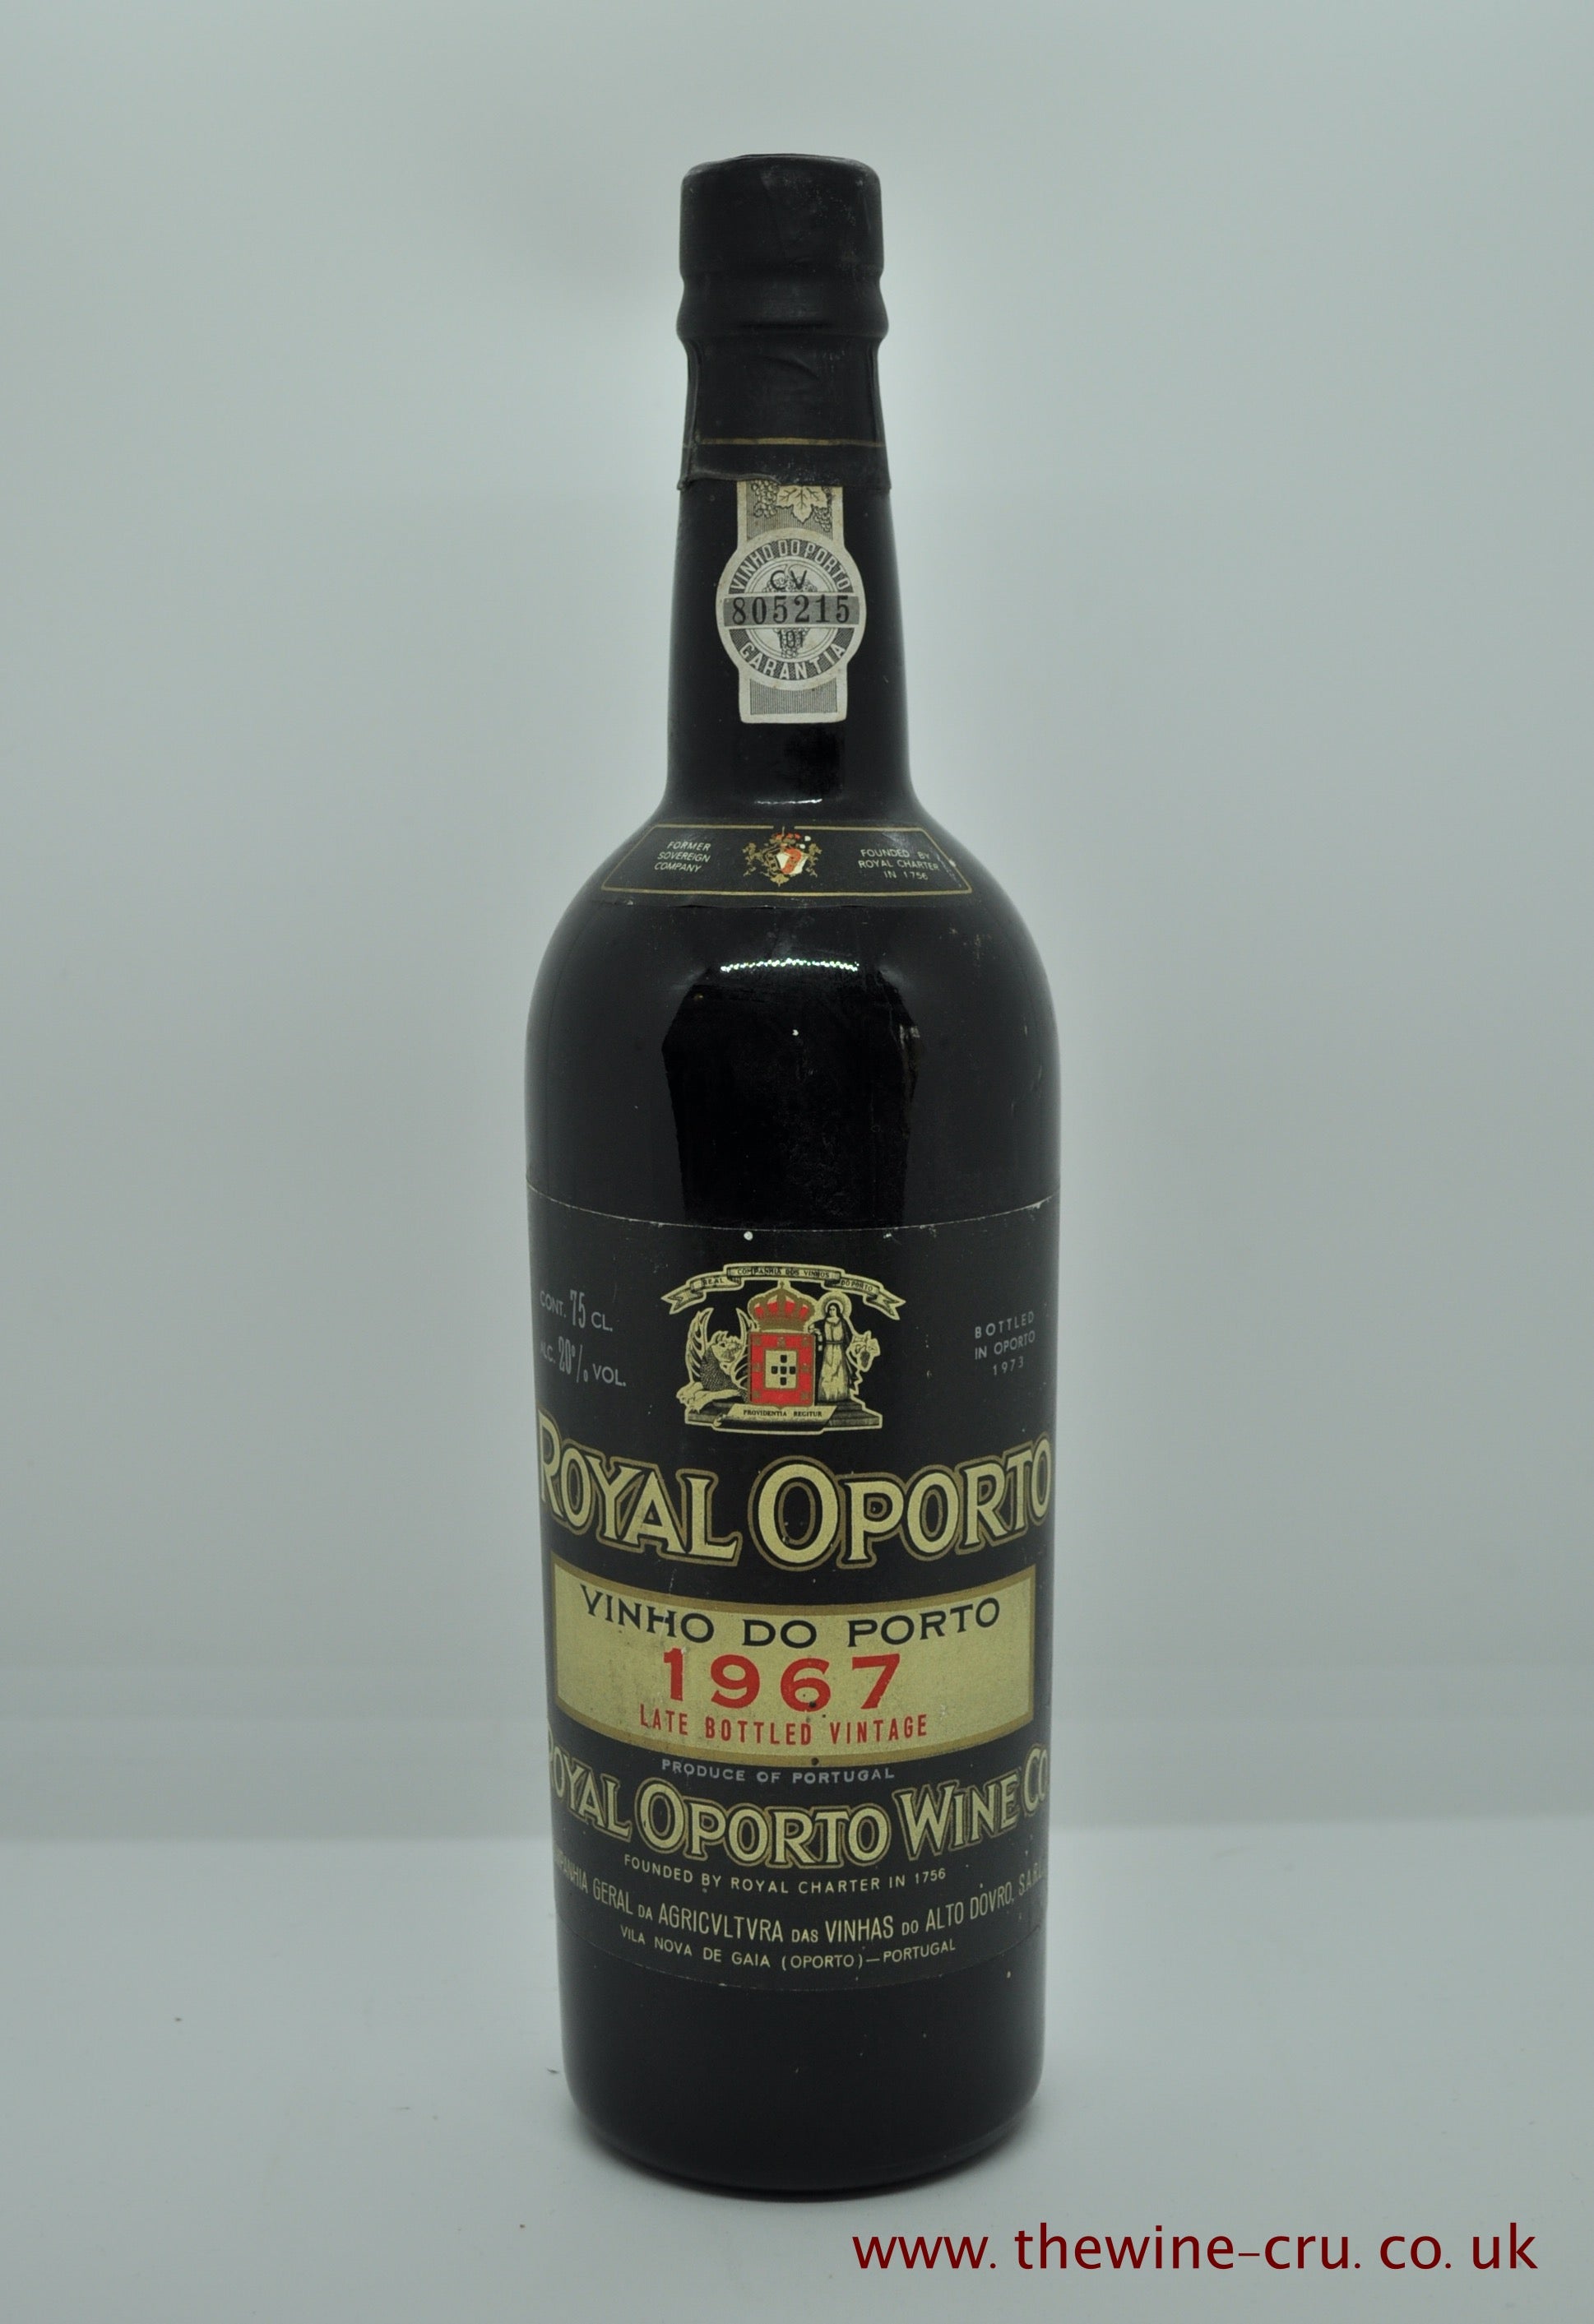 1967 vintage port wine. Royal Oporto Vinho Do Porto Late Bottle Vintage 1967. Portugal. Immediate delivery. Free local delivery. Gift wrapping available.